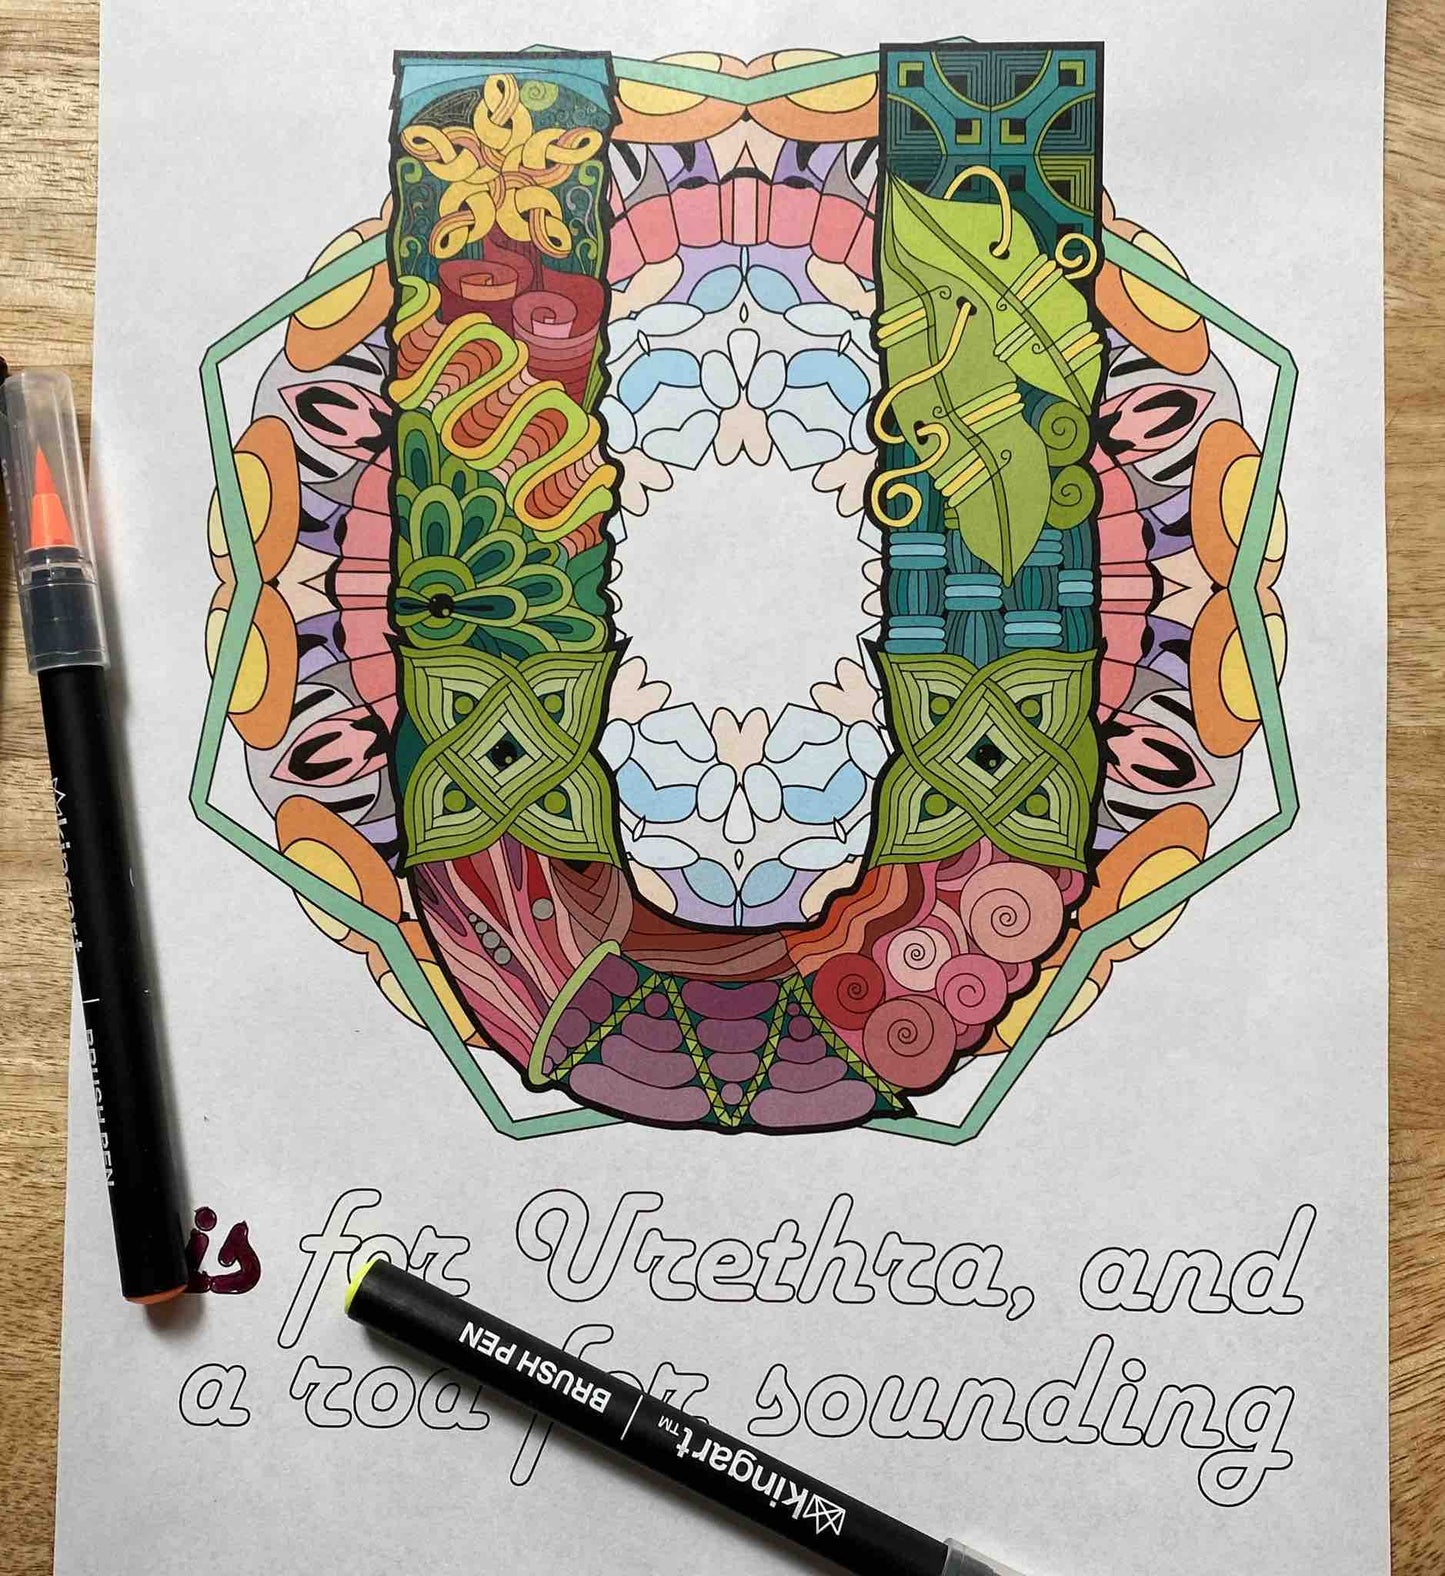 A page from  A is for Anal: A Kinky Coloring Book that has been colored that says: U is for urethra, and a rod for sounding.